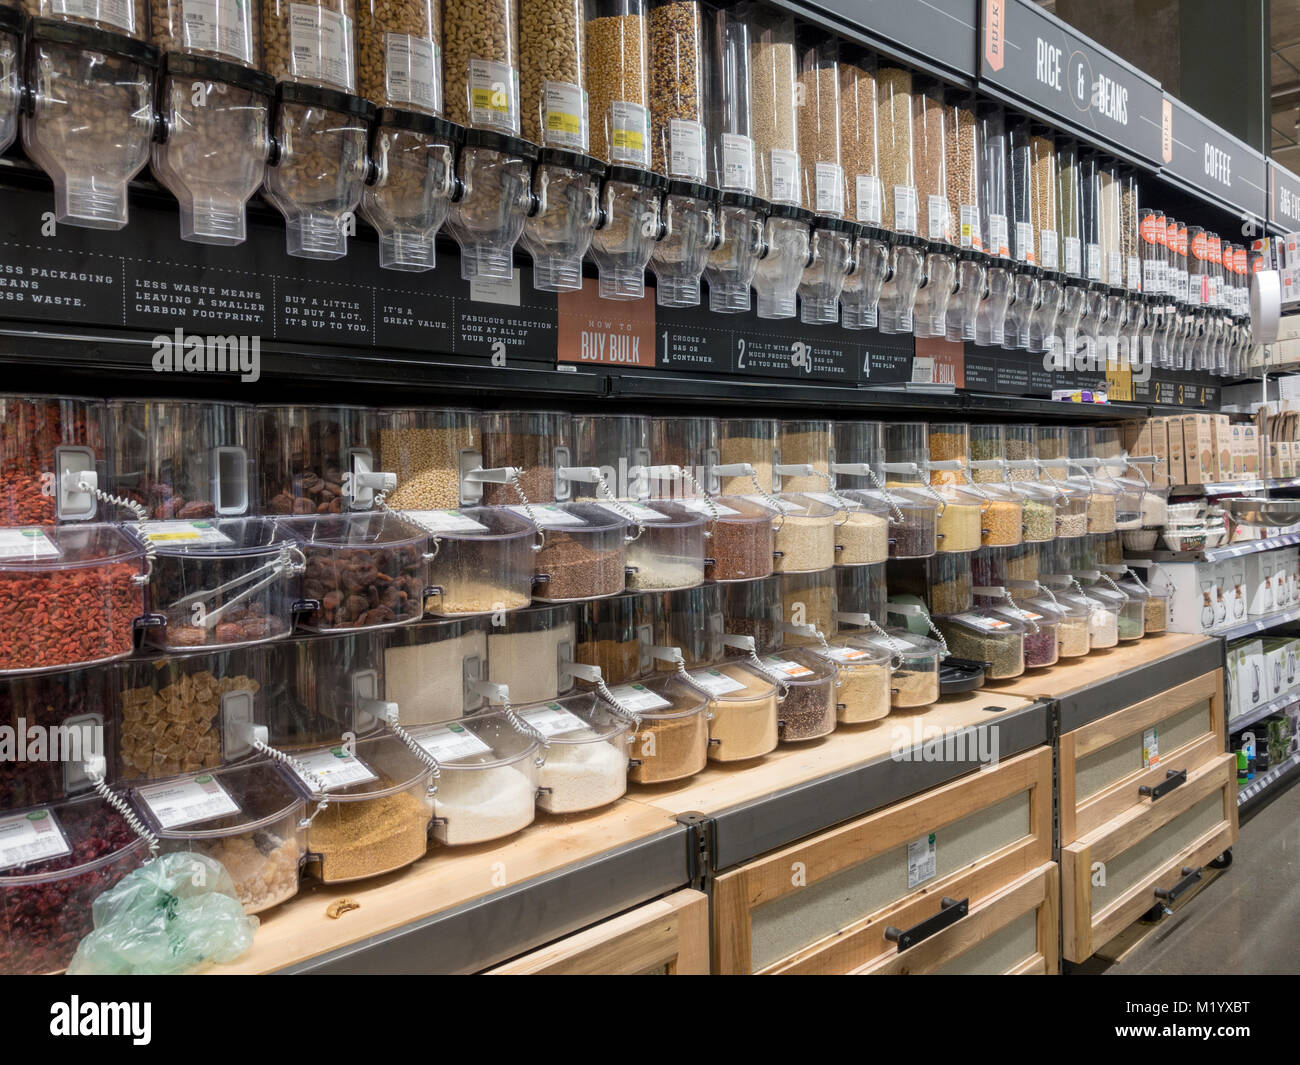 Bulk bins containing Rice, grains, flours, pasta, soup mixes, beans, cereals, dried fruits, nuts & seeds in Whole Foods Market store, Arlington, USA. Stock Photo